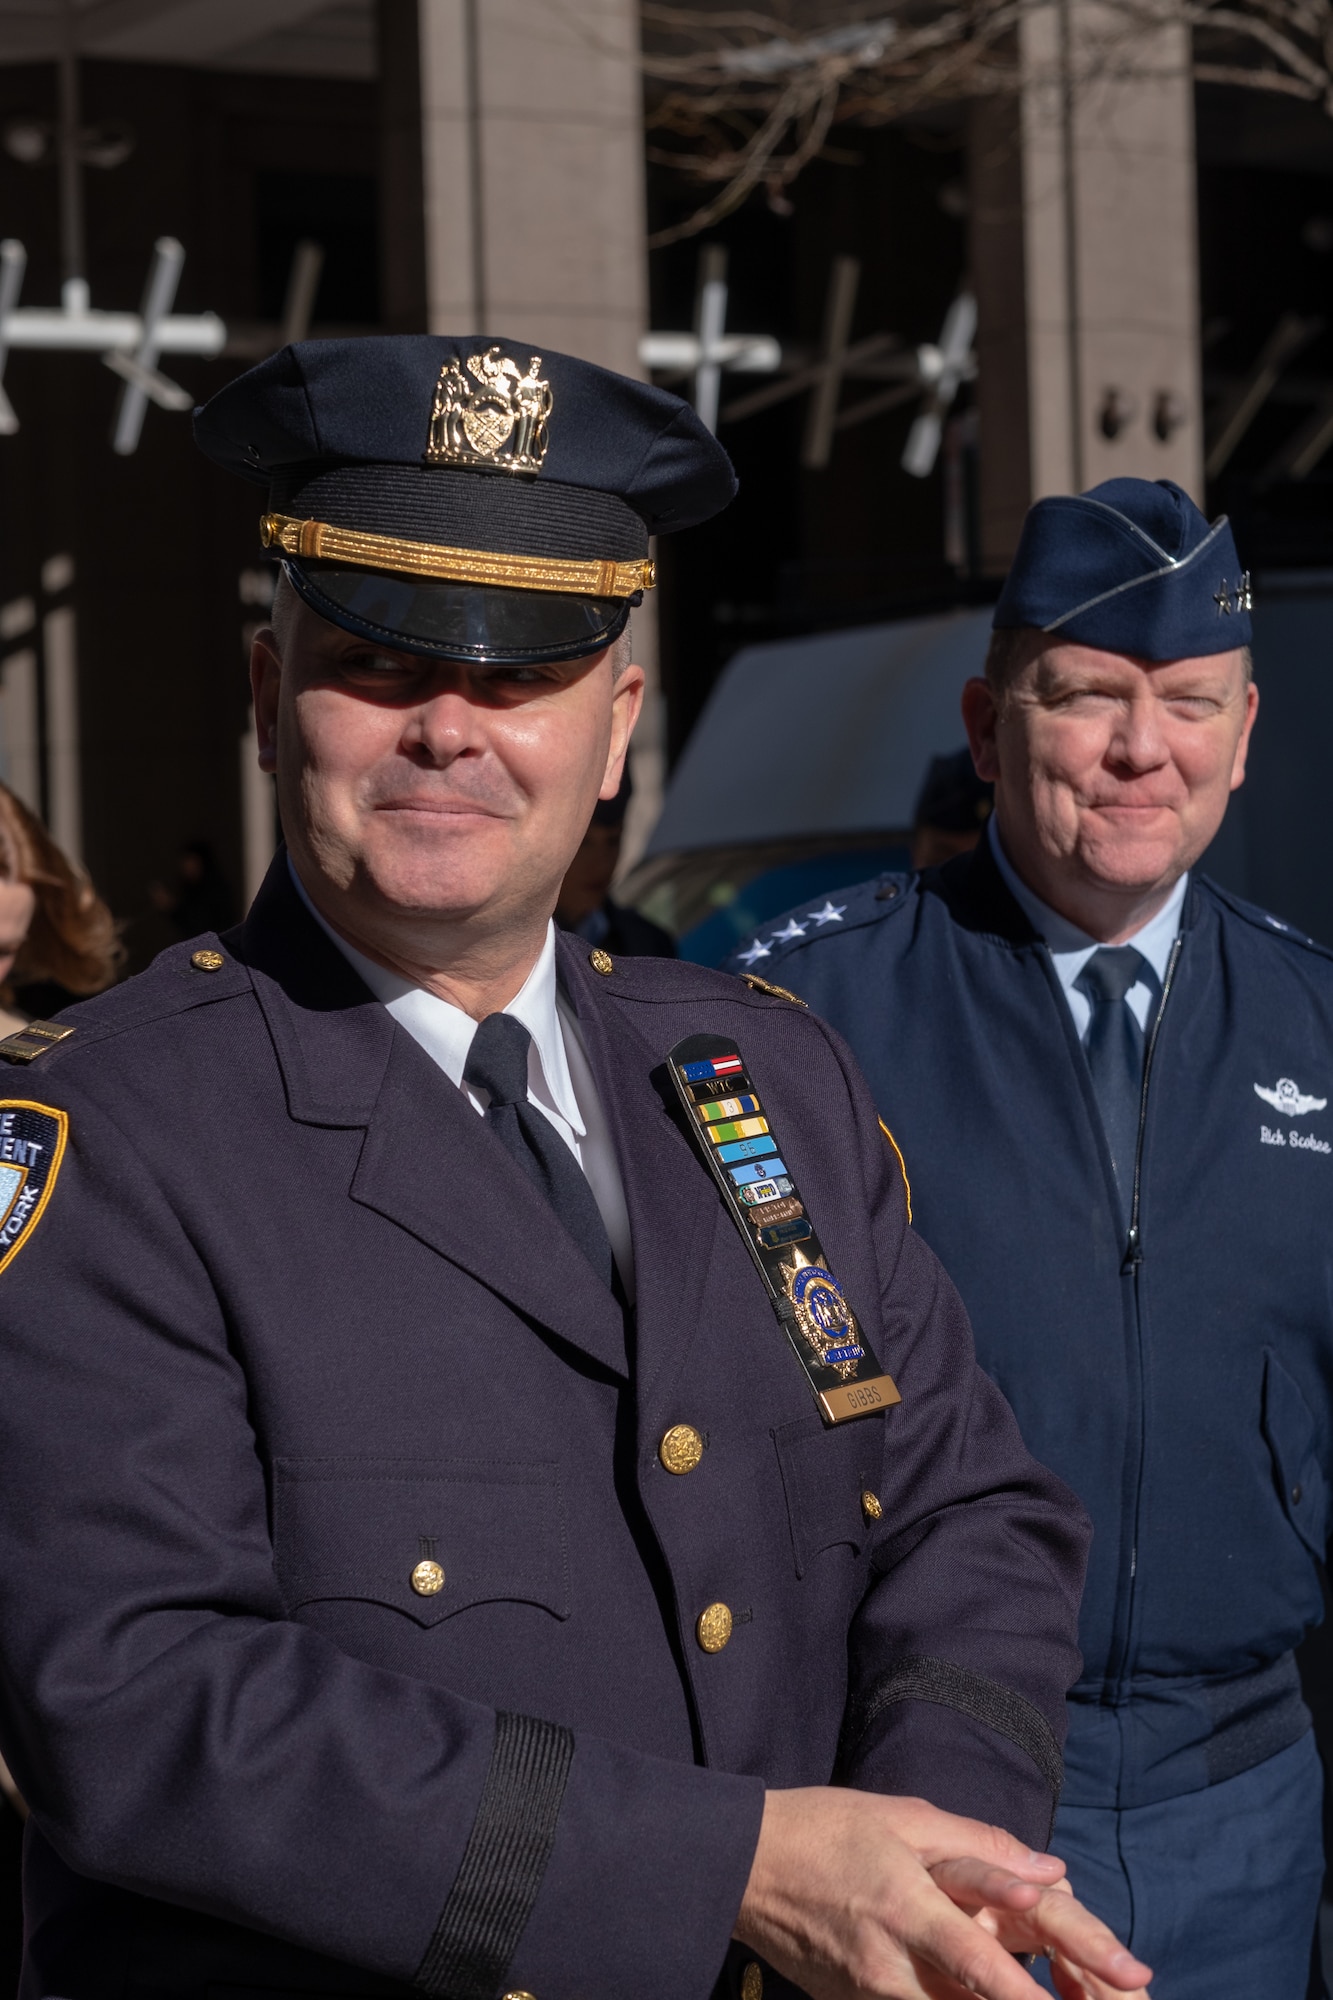 U.S. Air Force Lt. Gen.Richard W. Scobee, Air Force Reserve commander, is escorted by Lt. Col. Michael Gibbs, 514th Security Forces Squadron commander in New York City on January 11, 2019. Gibbs is a Reserve Citizen Airmen with the 514th Air Mobility Wing located at Joint Base McGuire-Dix-Lakehurst, N.J., and a captain in the New York Police Department. (U.S. Air Force photo by Staff Sgt. Michael Ki Hong)